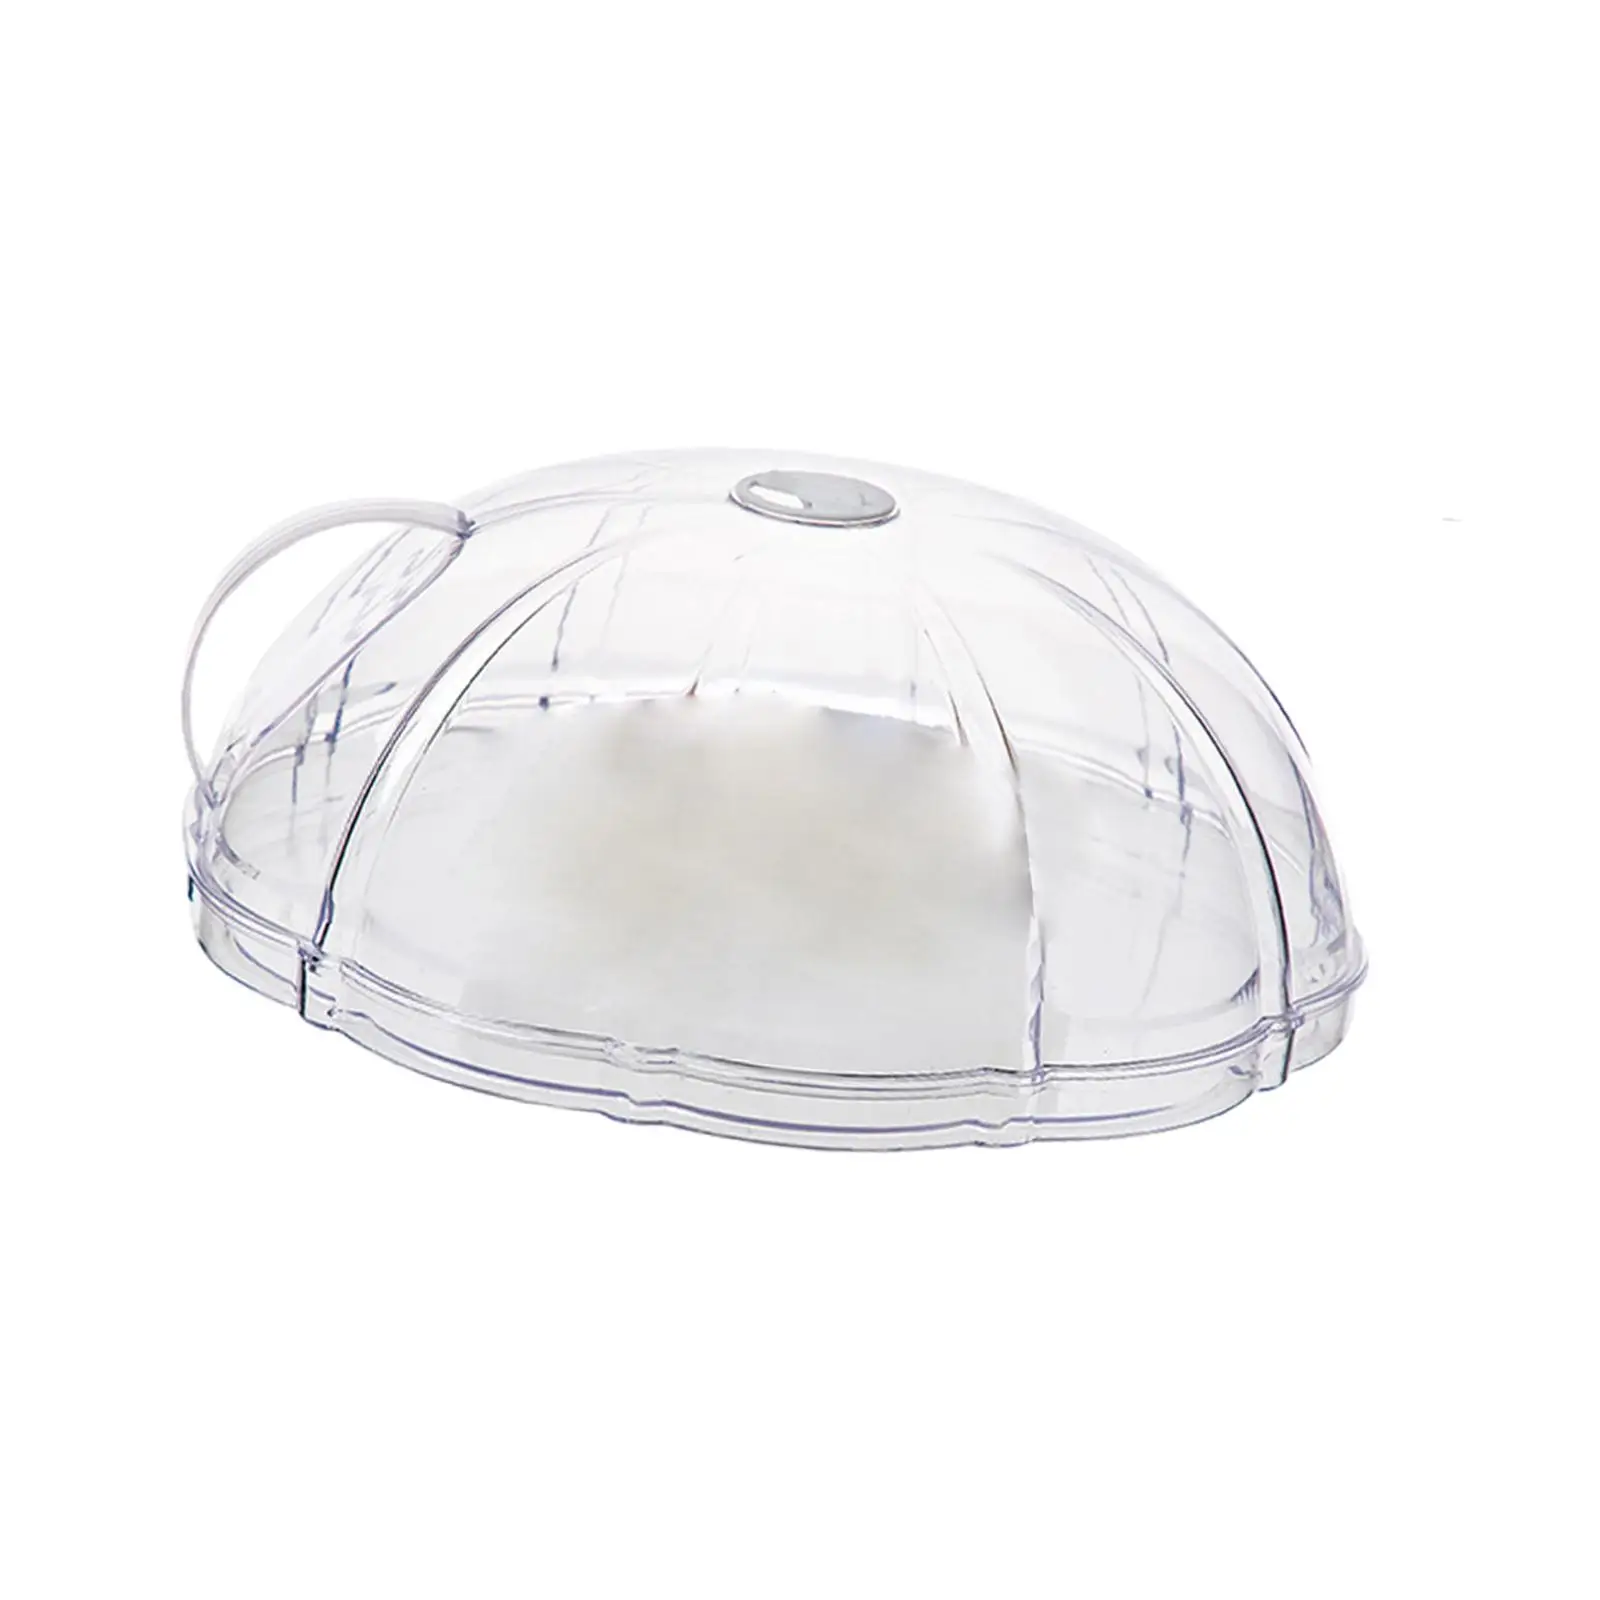 Food Splatter Cover Multipurpose Reusable Kitchen Gadgets with Steam Vents Clear Food Lid for Bakery Party Bread Hot Dishes